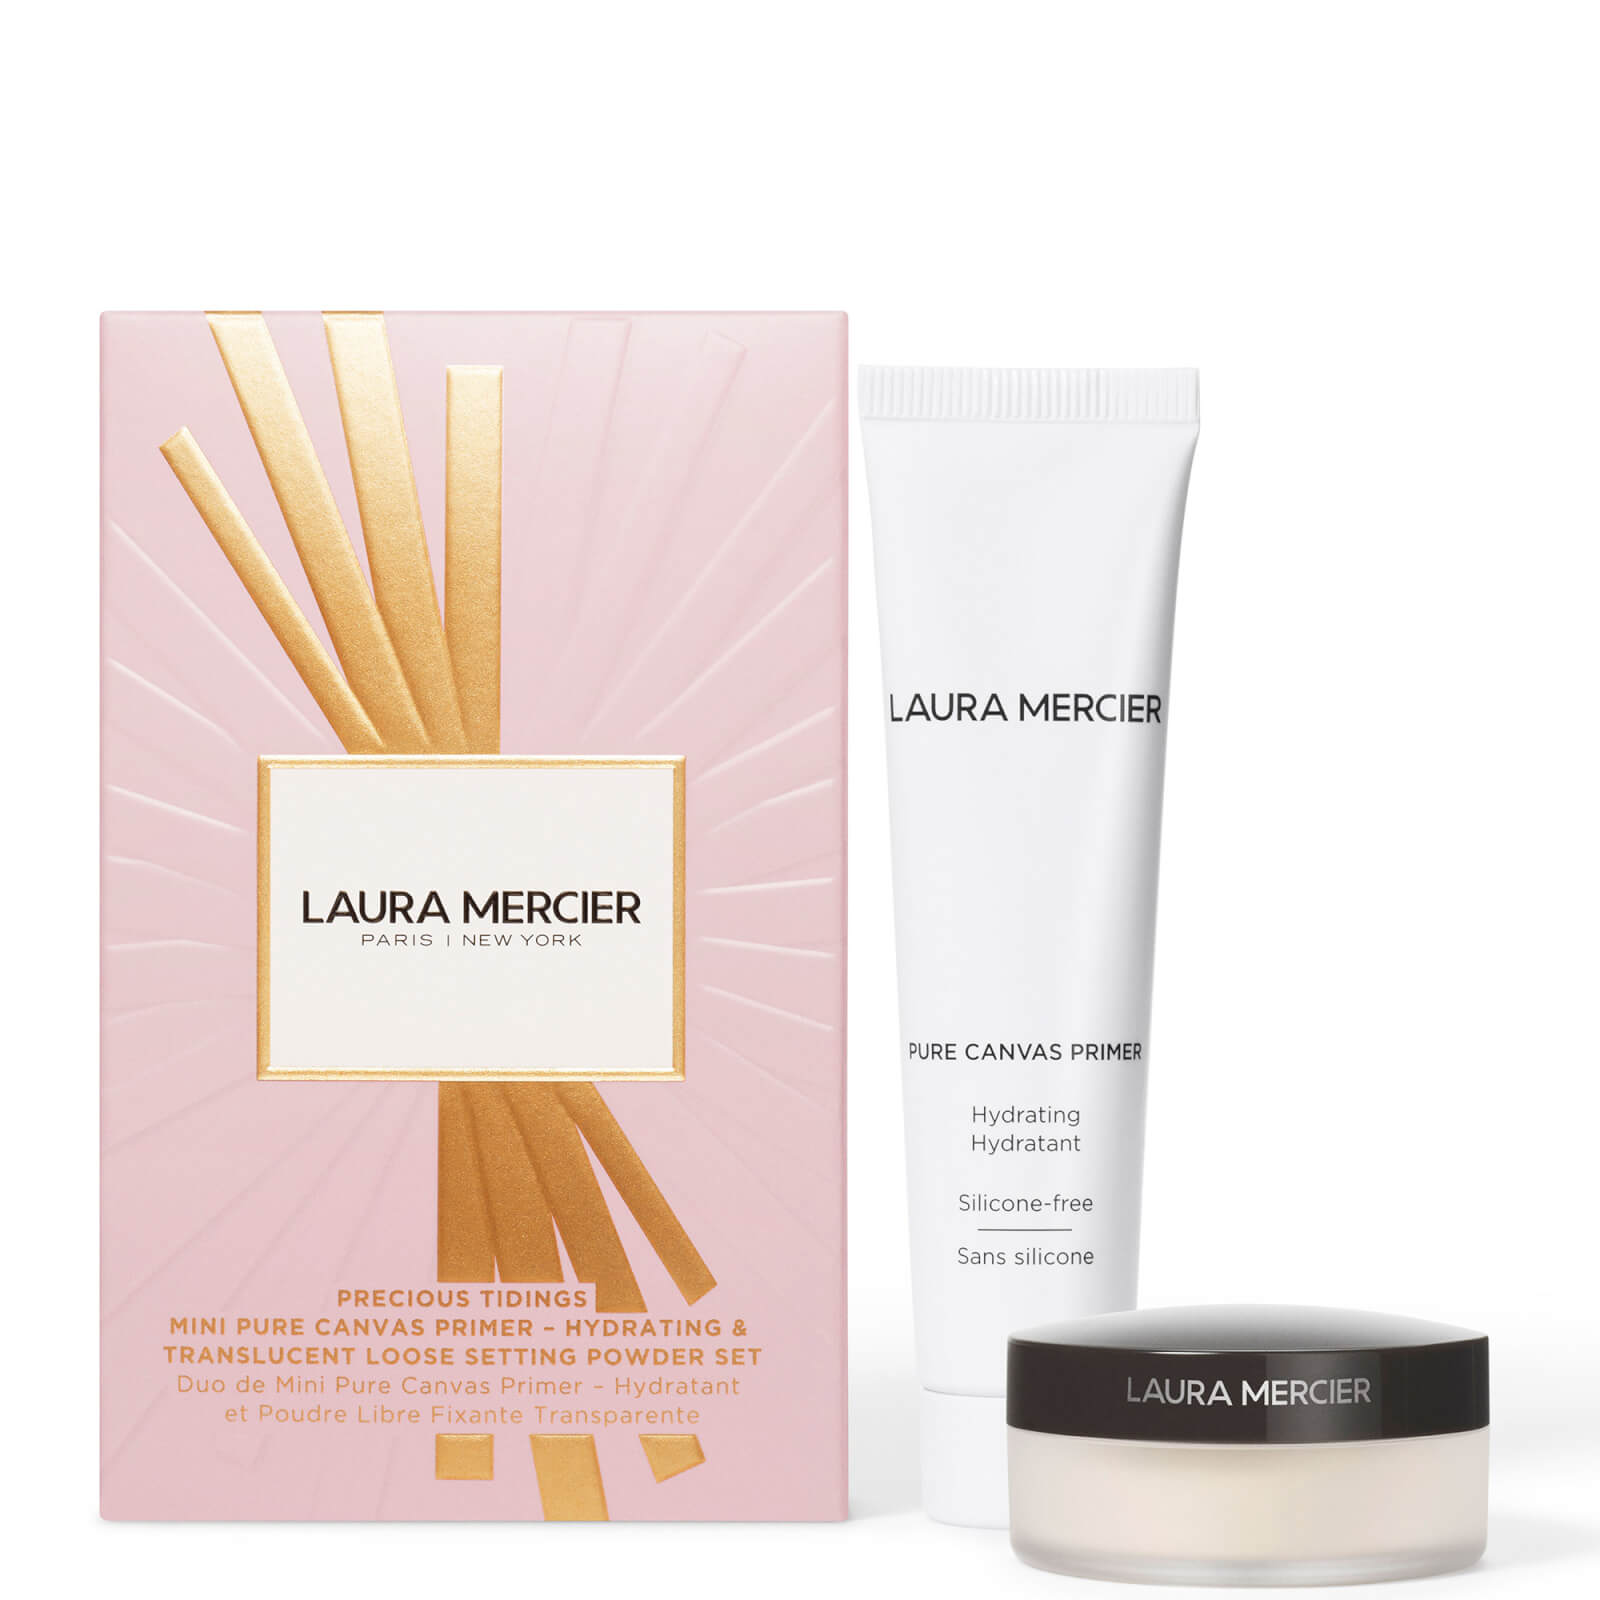 Laura Mercier Holiday 22 Translucent Powder and Hydrating Primer Duo